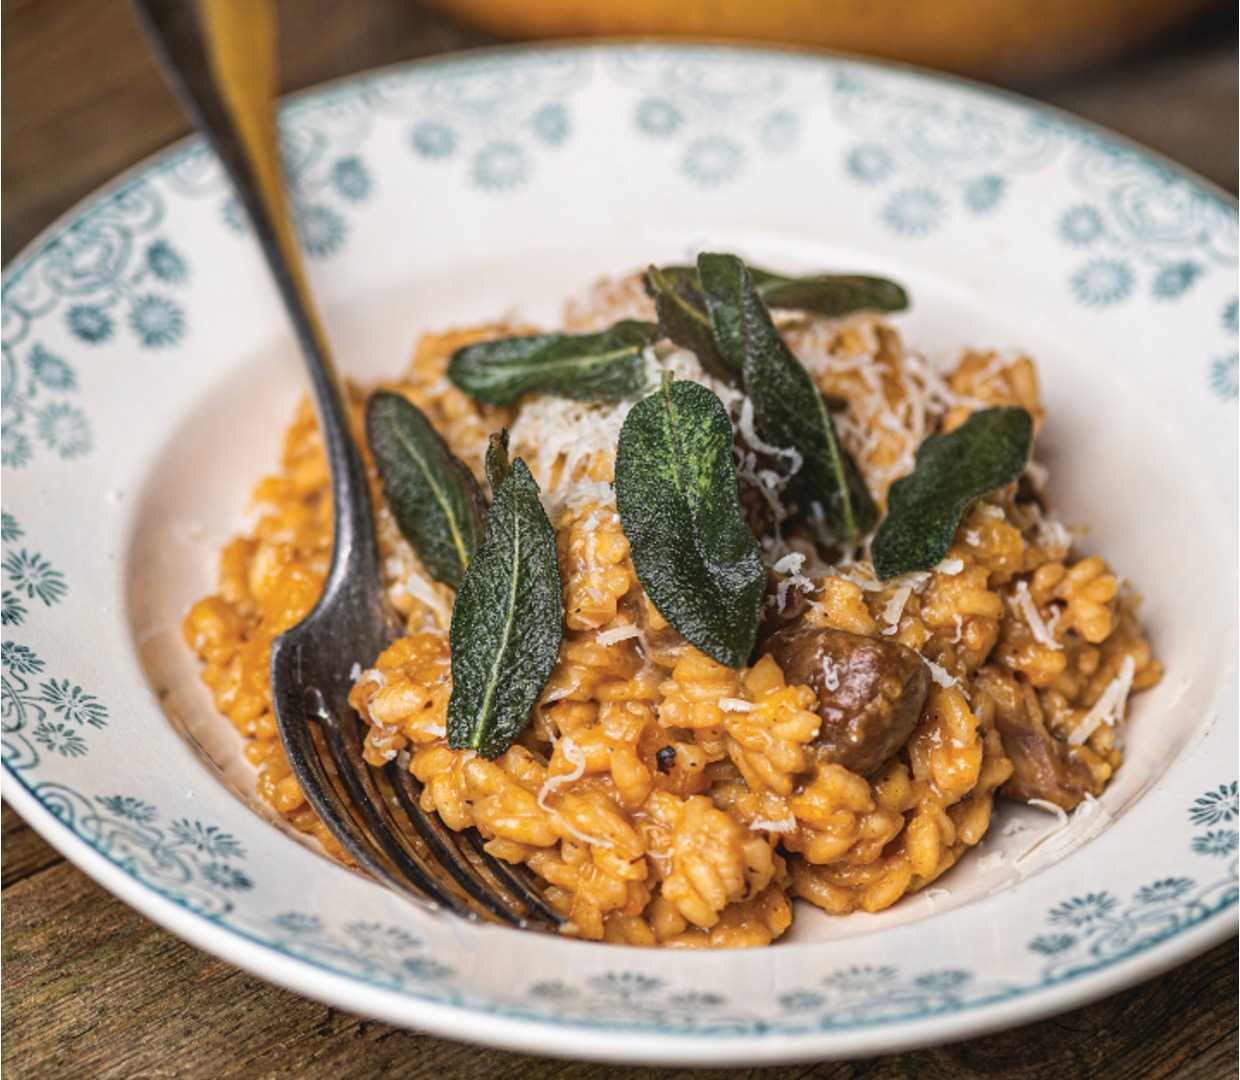 Pumpkin risotto with chestnuts and crispy fried sage